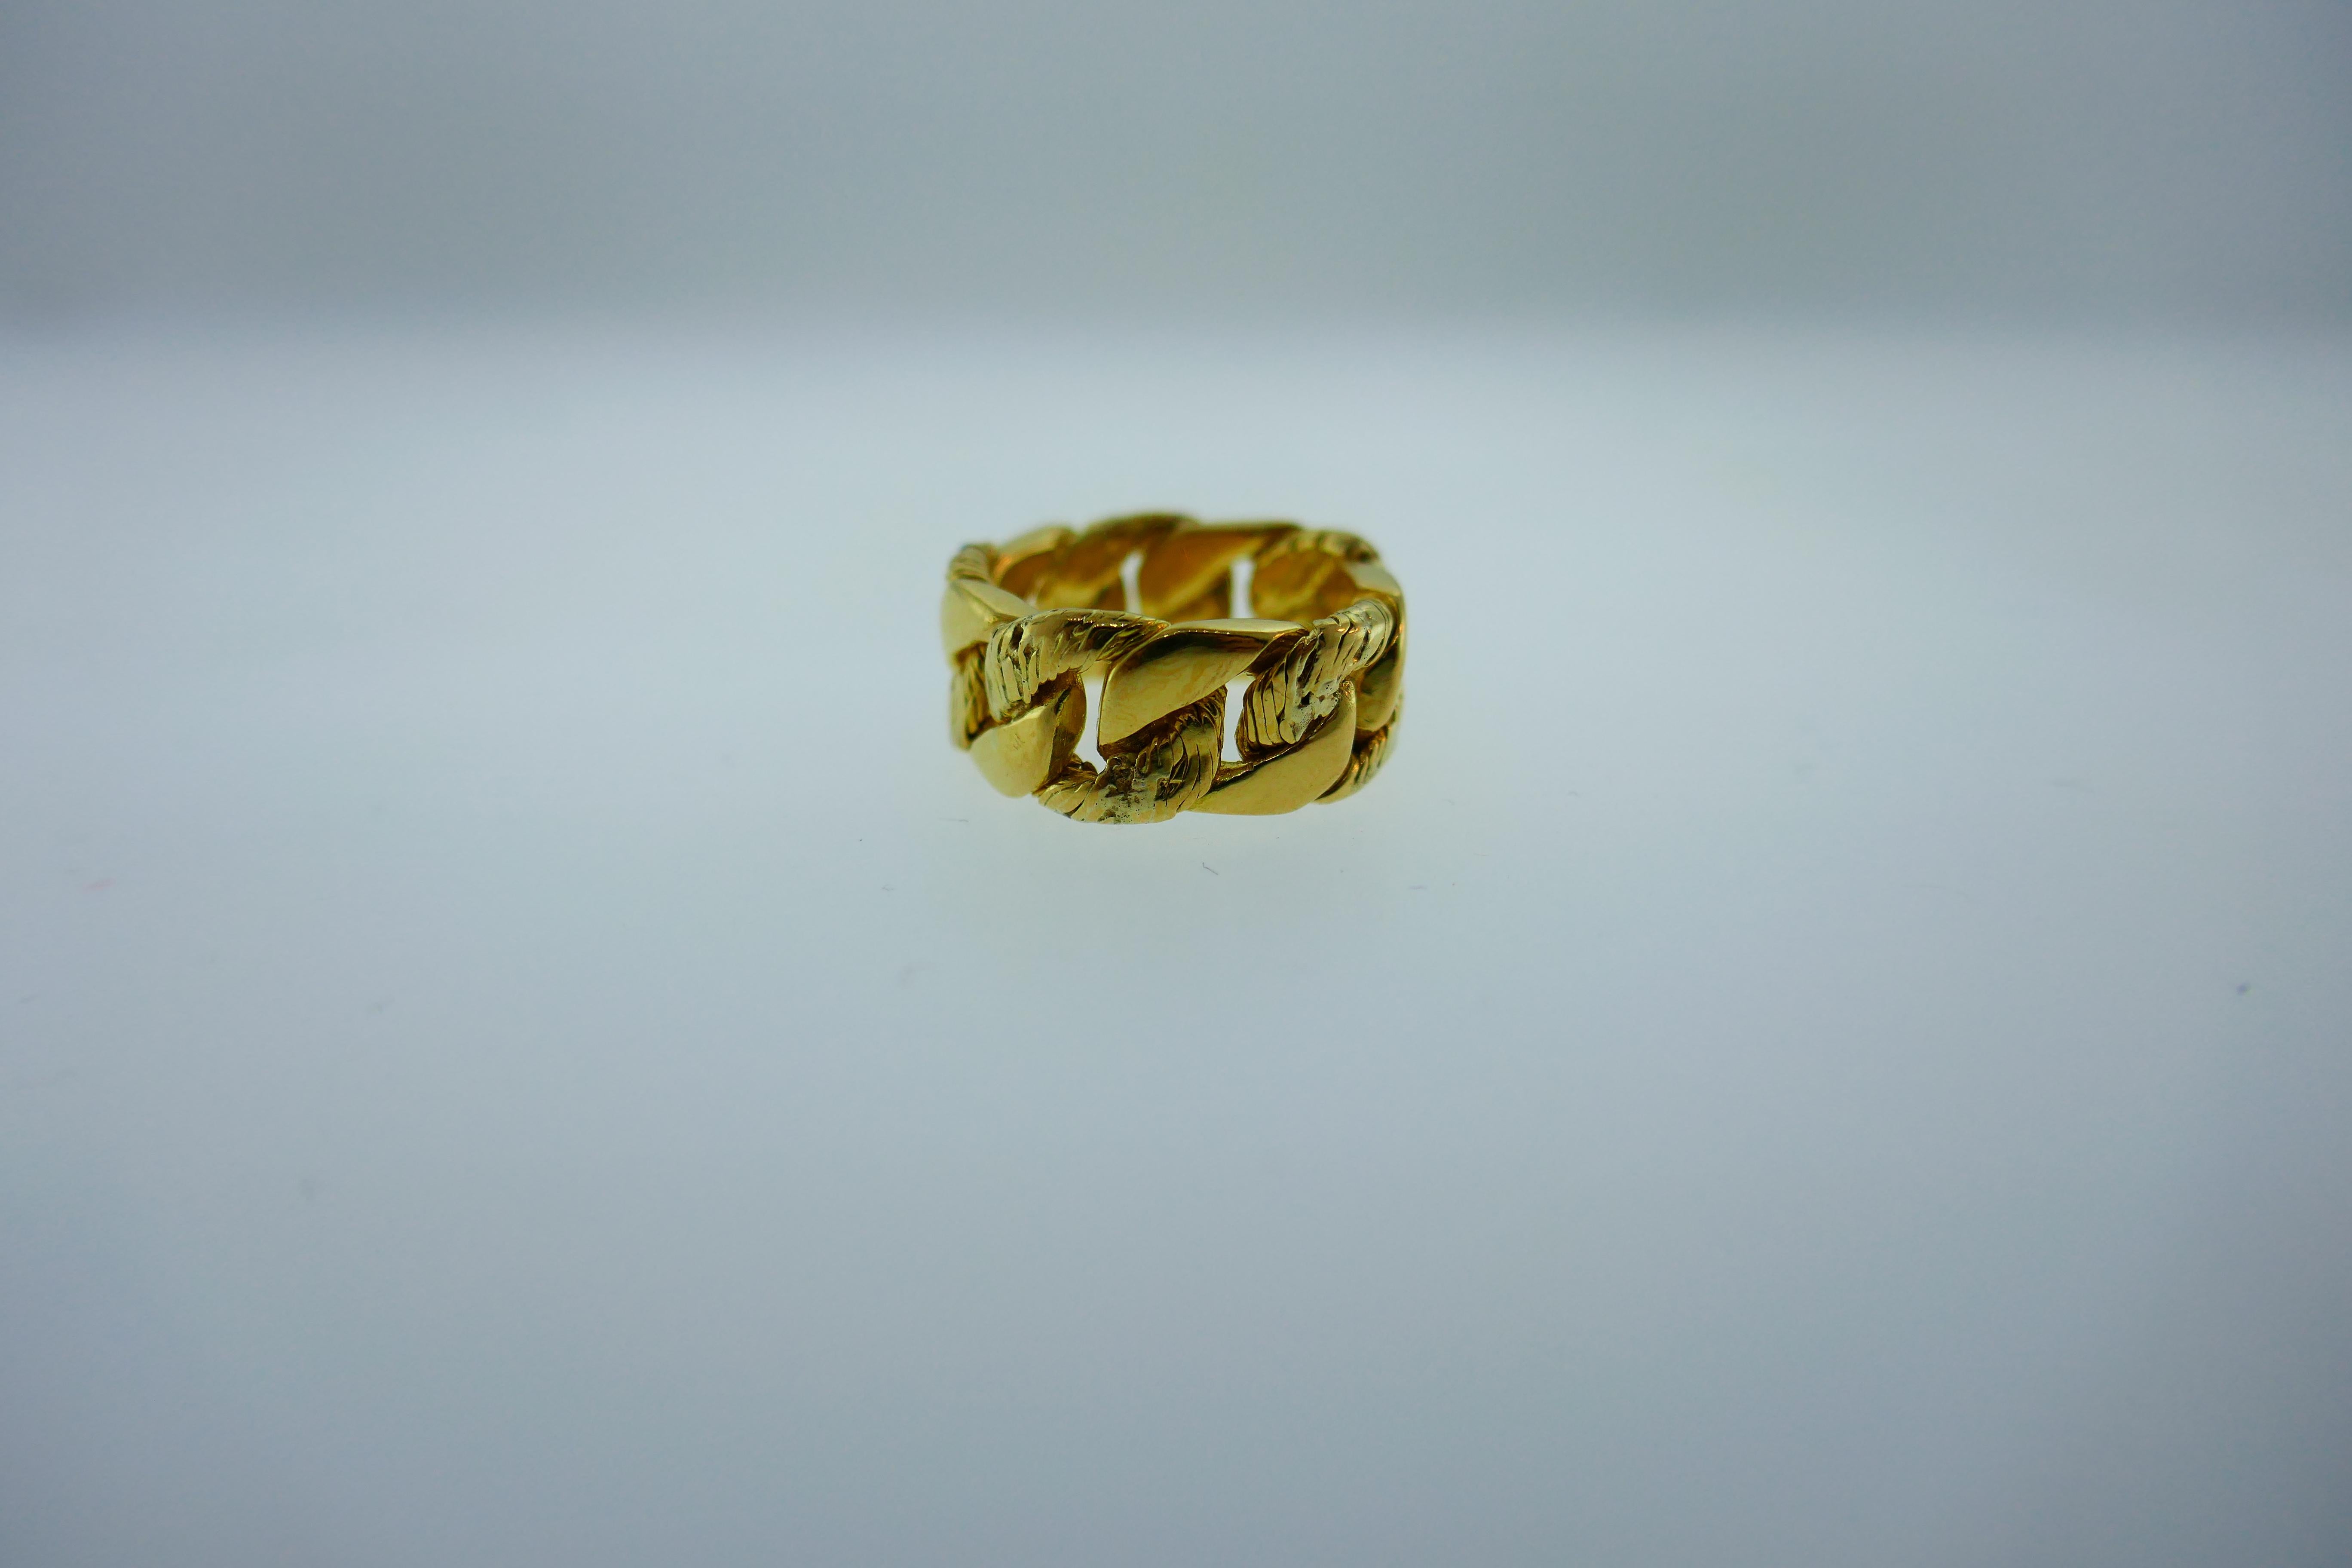 Boucheron Georges Lenfant 18k Yellow Gold Woven Ring Vintage Circa 1970s


Here is your chance to purchase a beautiful and highly collectible designer ring.  Truly a great piece at a great price! 

Weight: 10.5 grams

Dimensions: 5/16